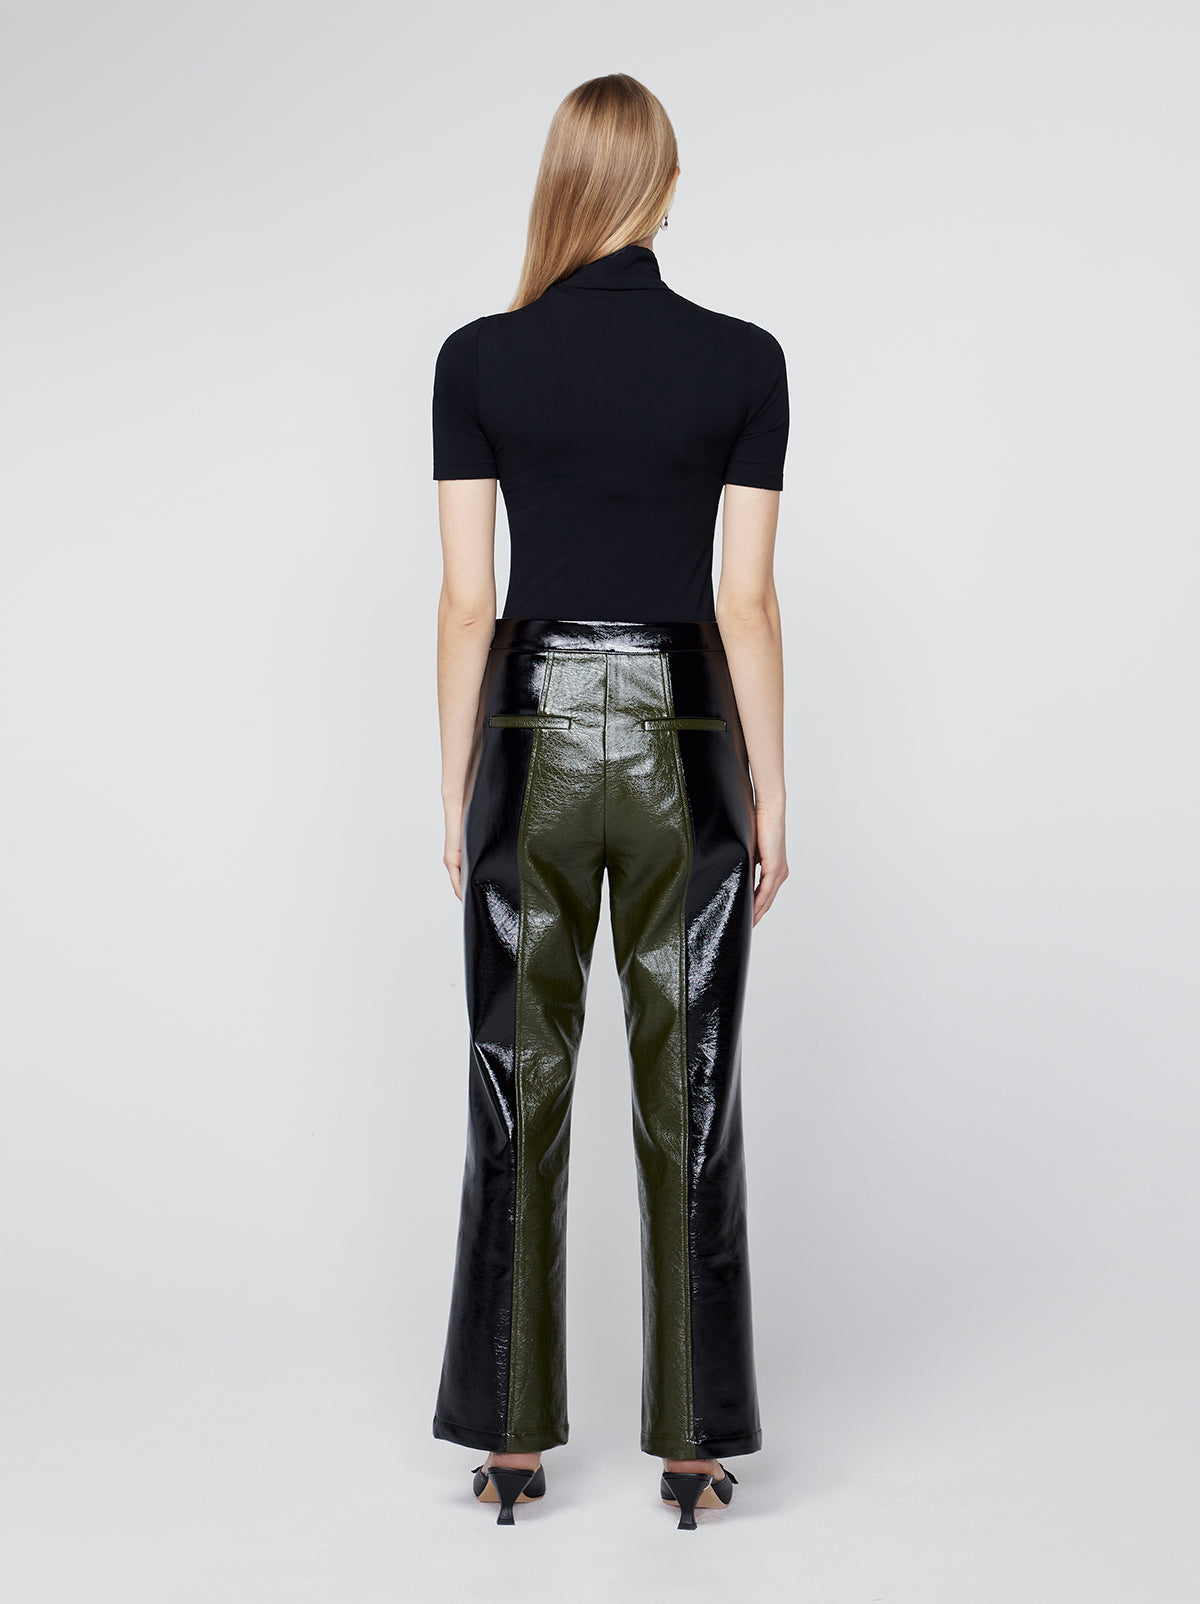 Peyton Olive And Black Vinyl Trousers